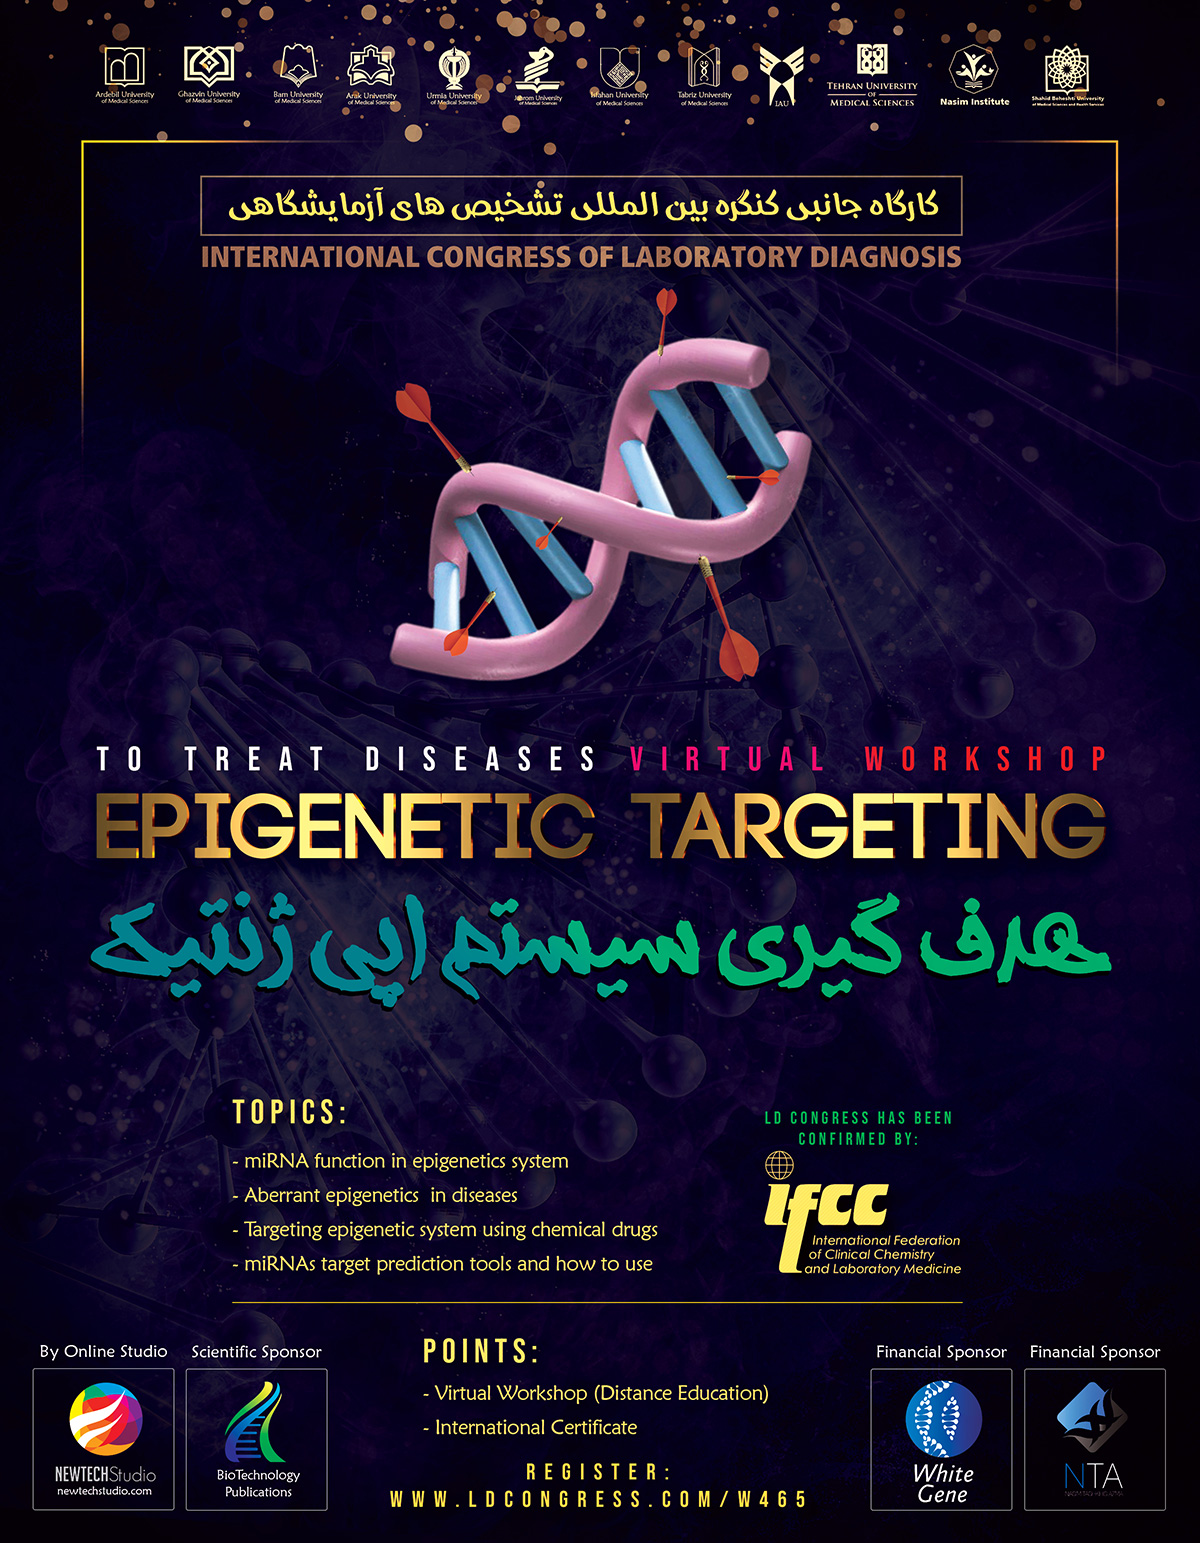 Targeting Epigenetics for diseases therapy